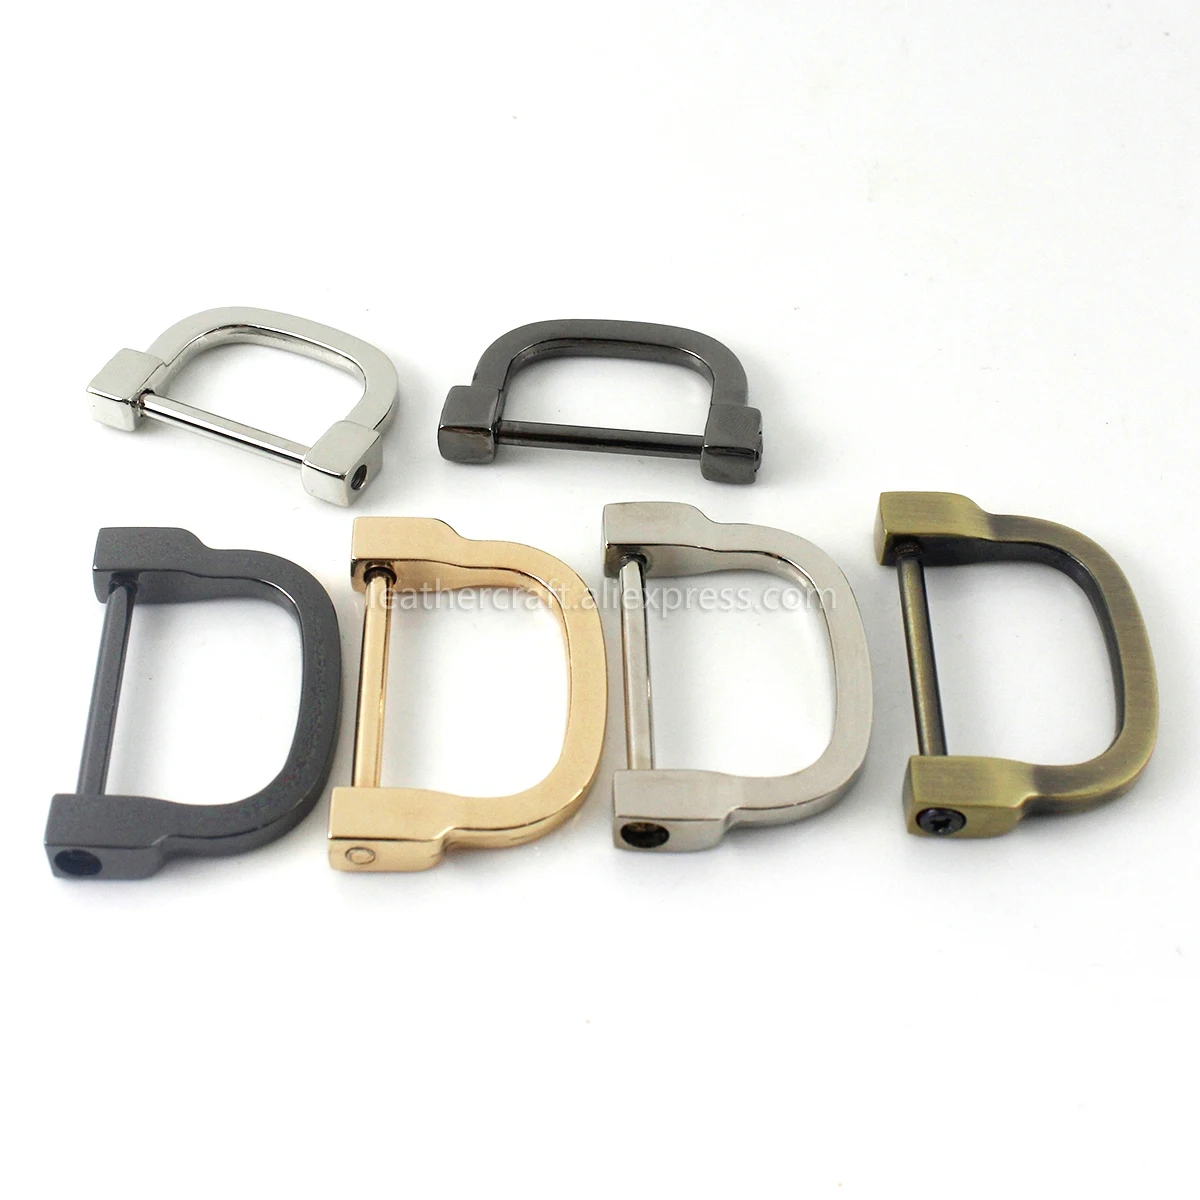 1 x Metal 2 Sizes D-ring shackle Buckle Keychain Ring Hook screw pin joint Connecter Bag Strap Clasp Leathercraft Parts images - 6